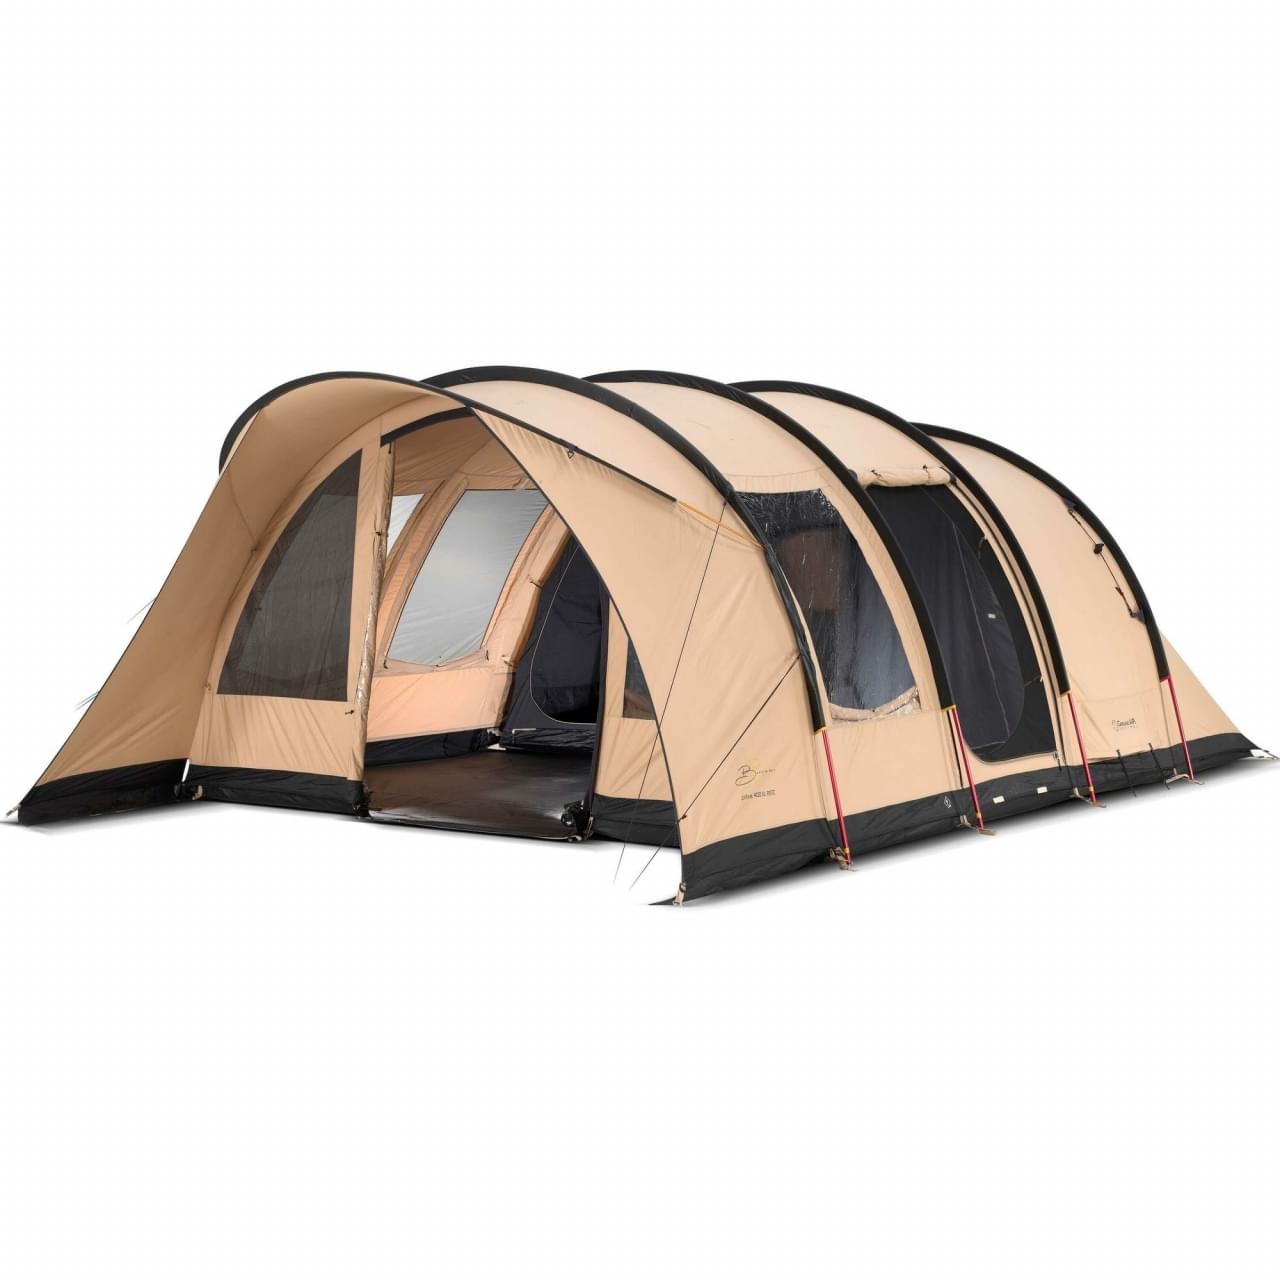 Bardani Spitfire 400 XL RSTC / 5 Persoons Tent